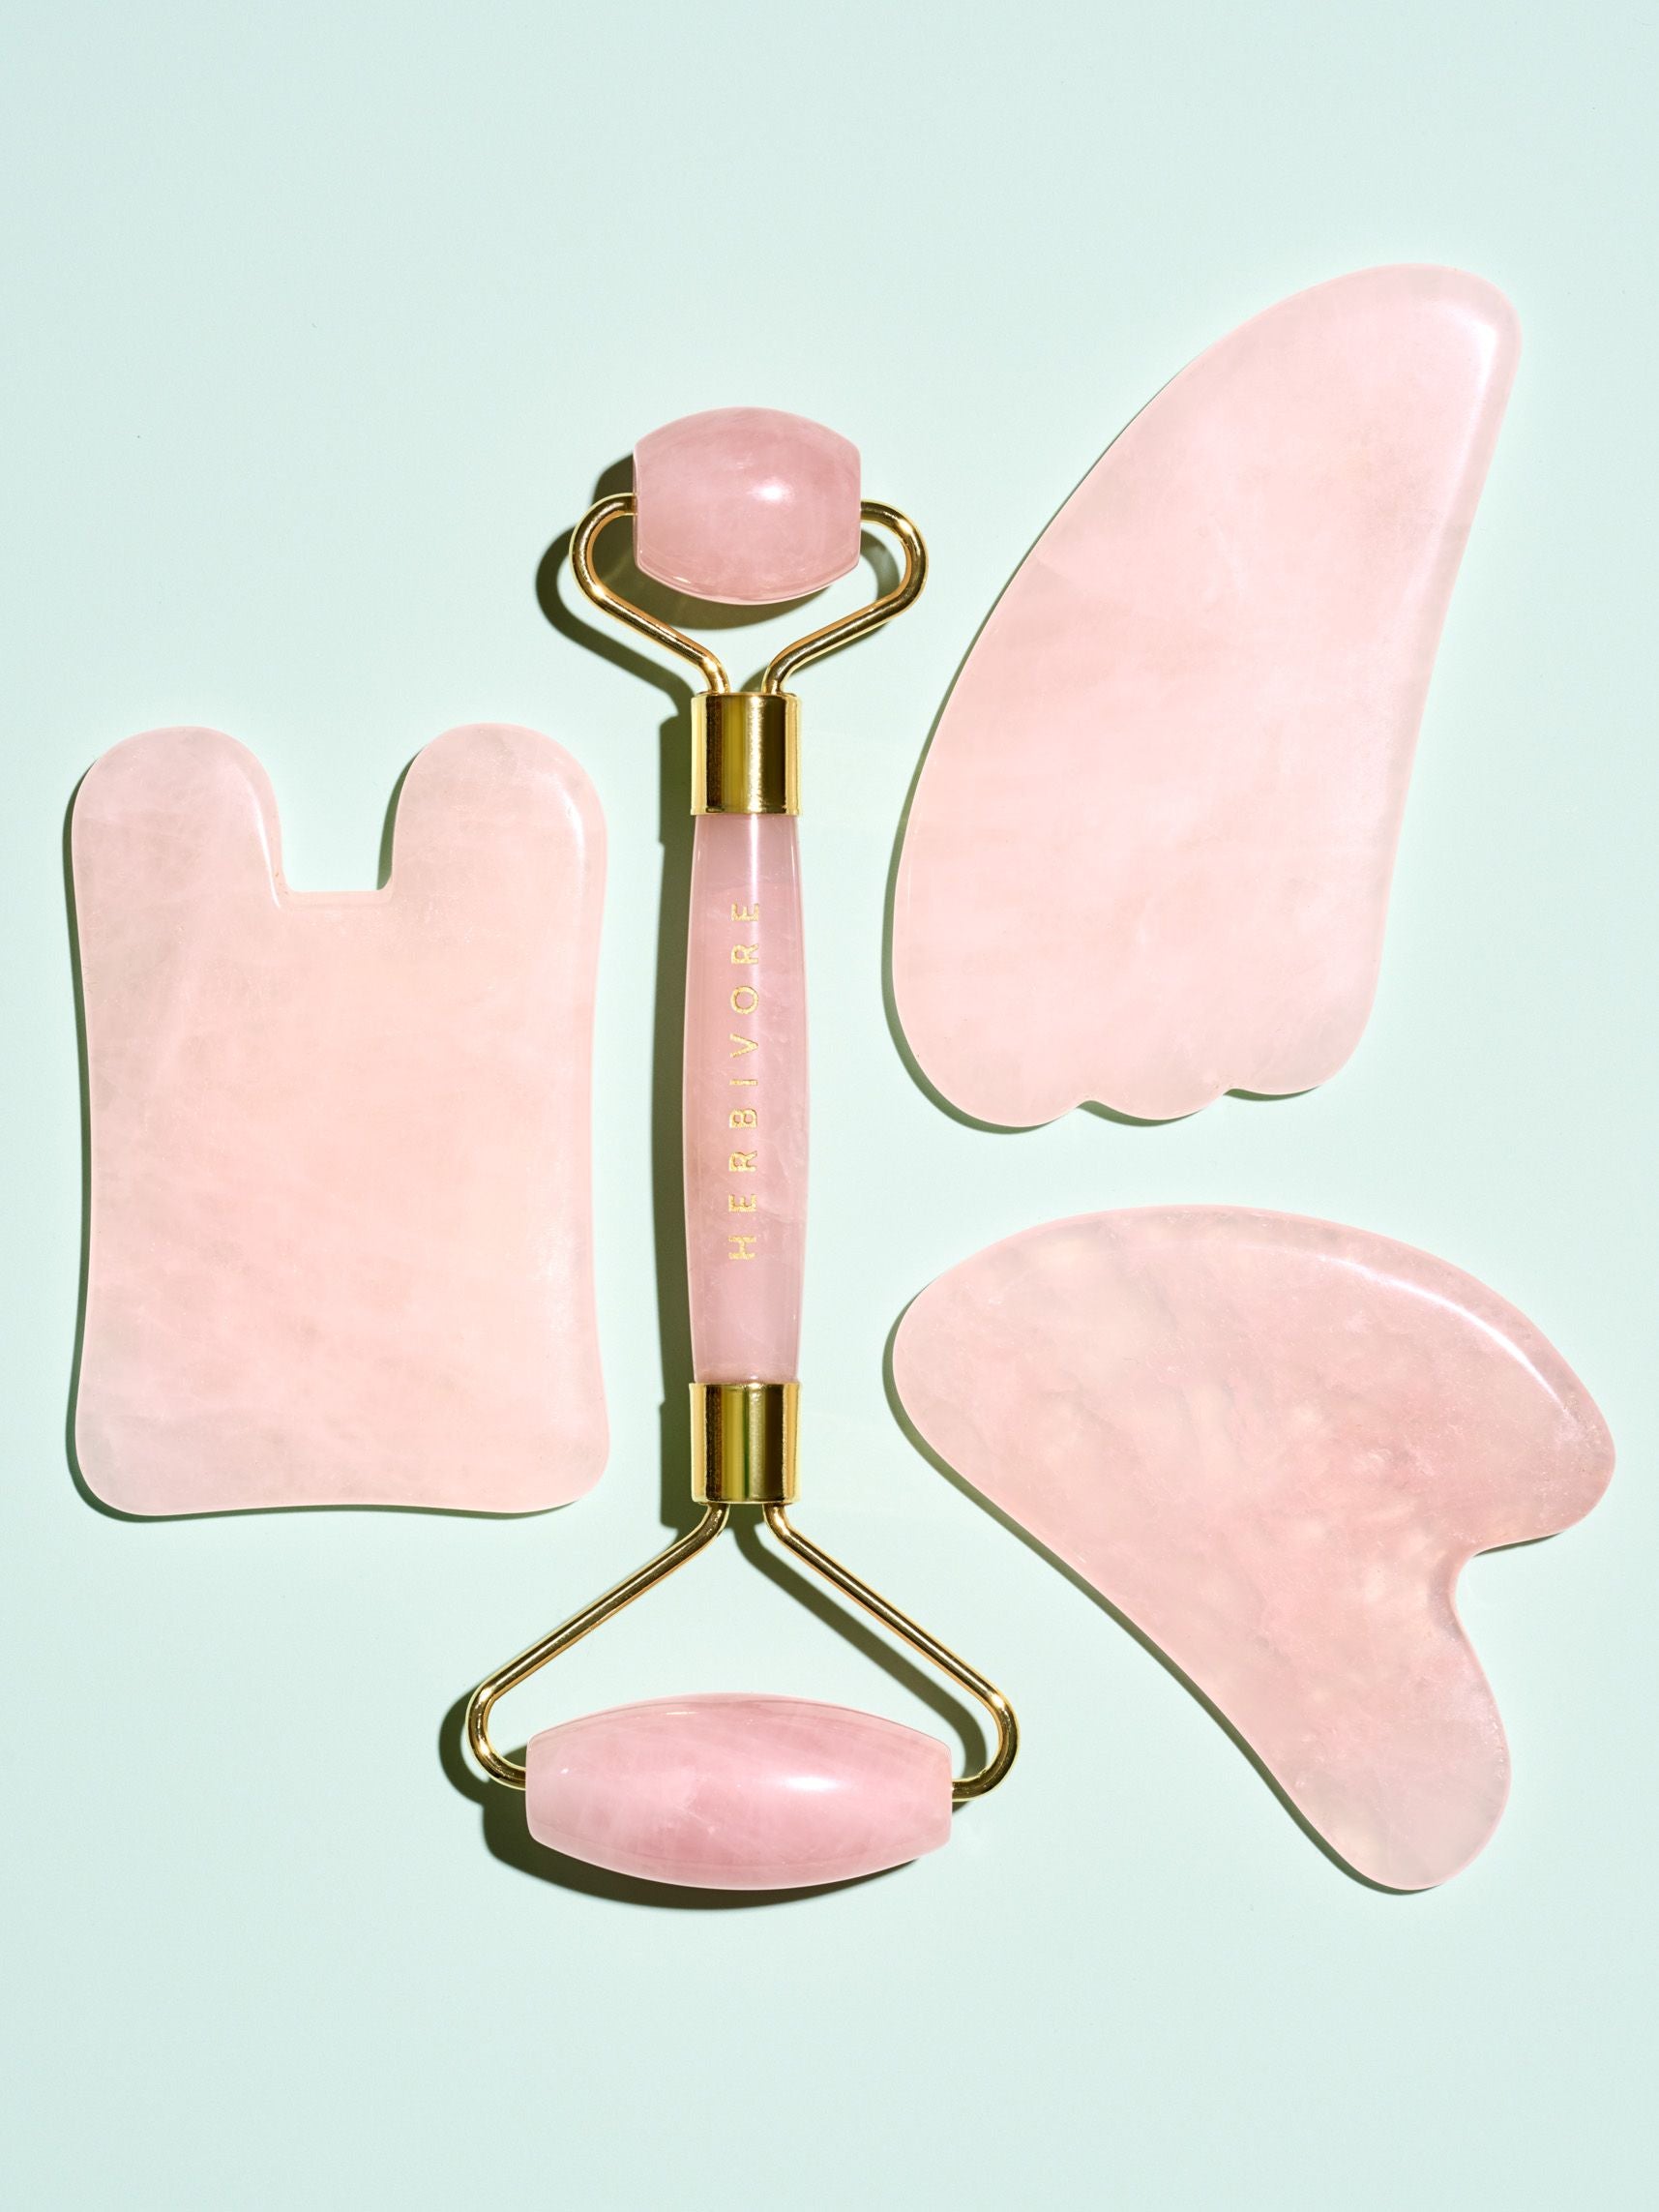 Gua Sha vs Facial Roller - Which should you use?